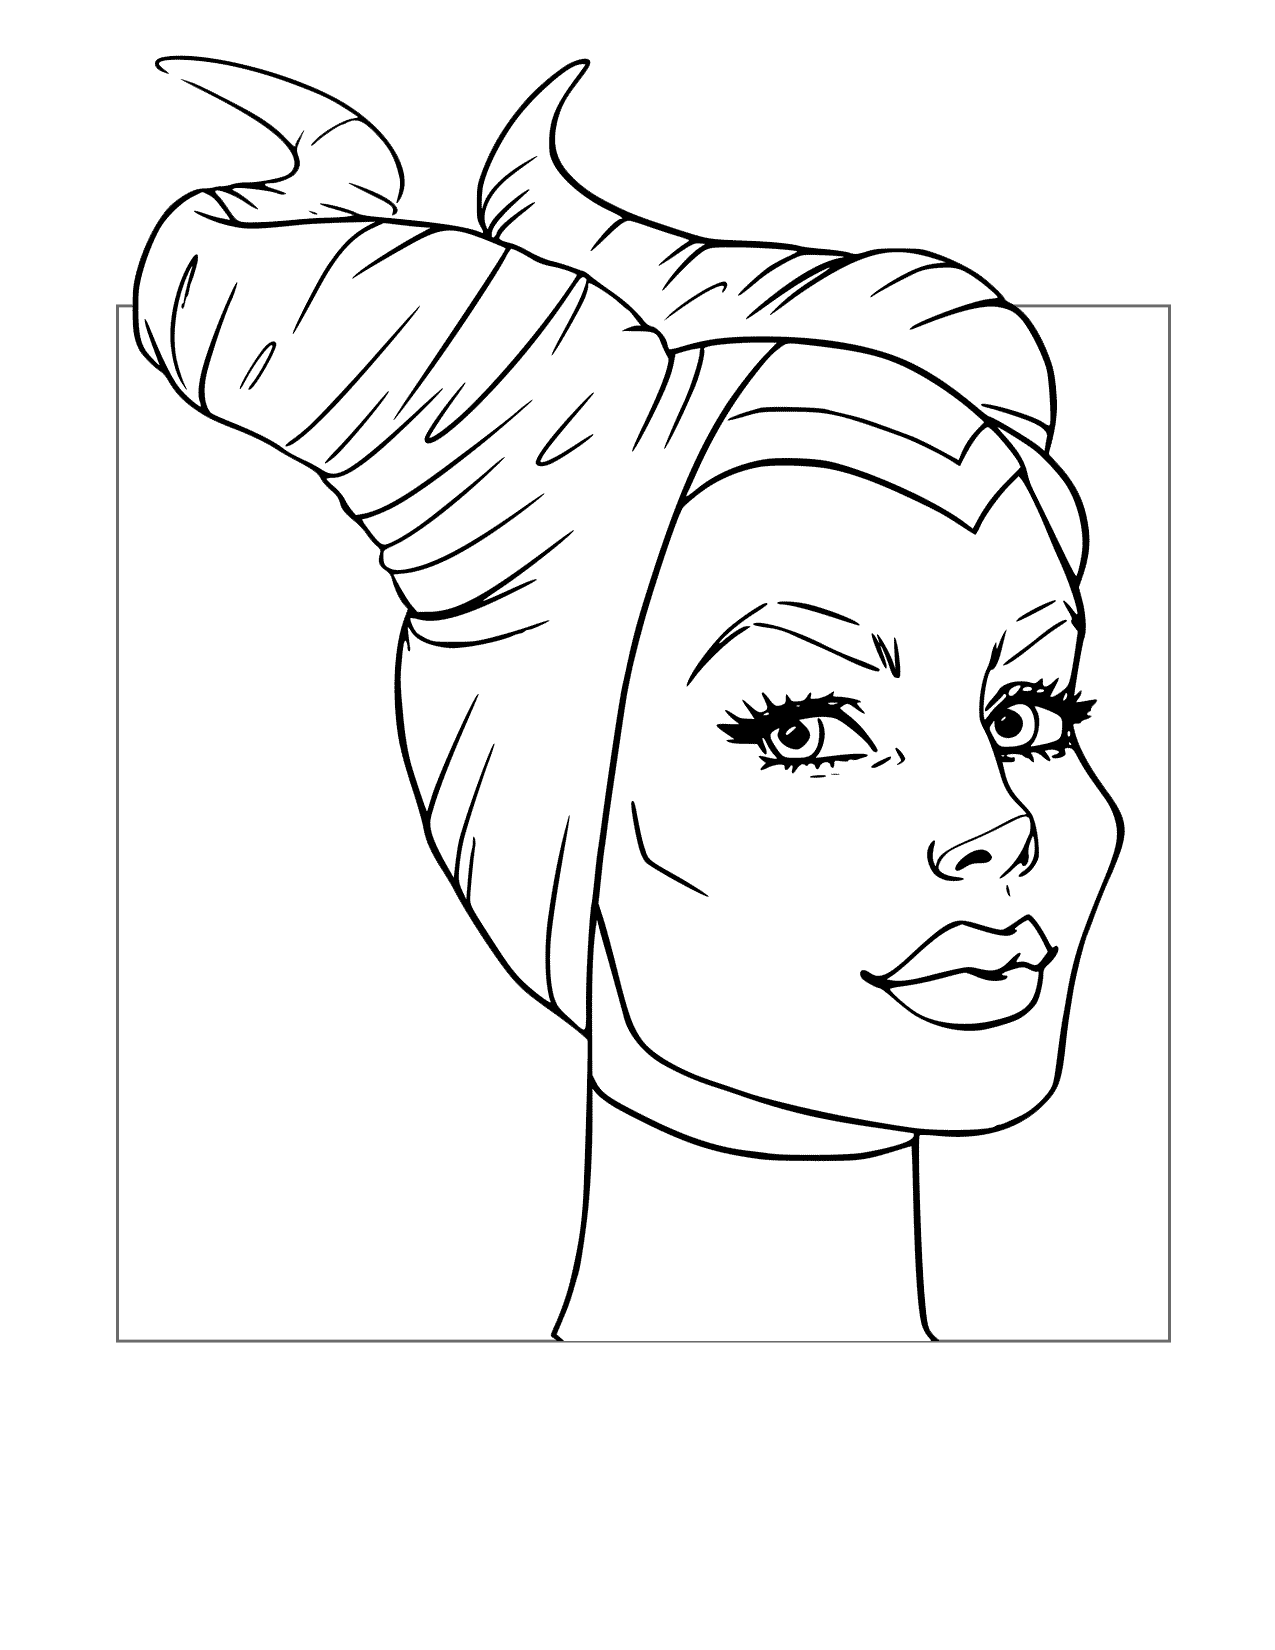 Maleficents Horns Coloring Page